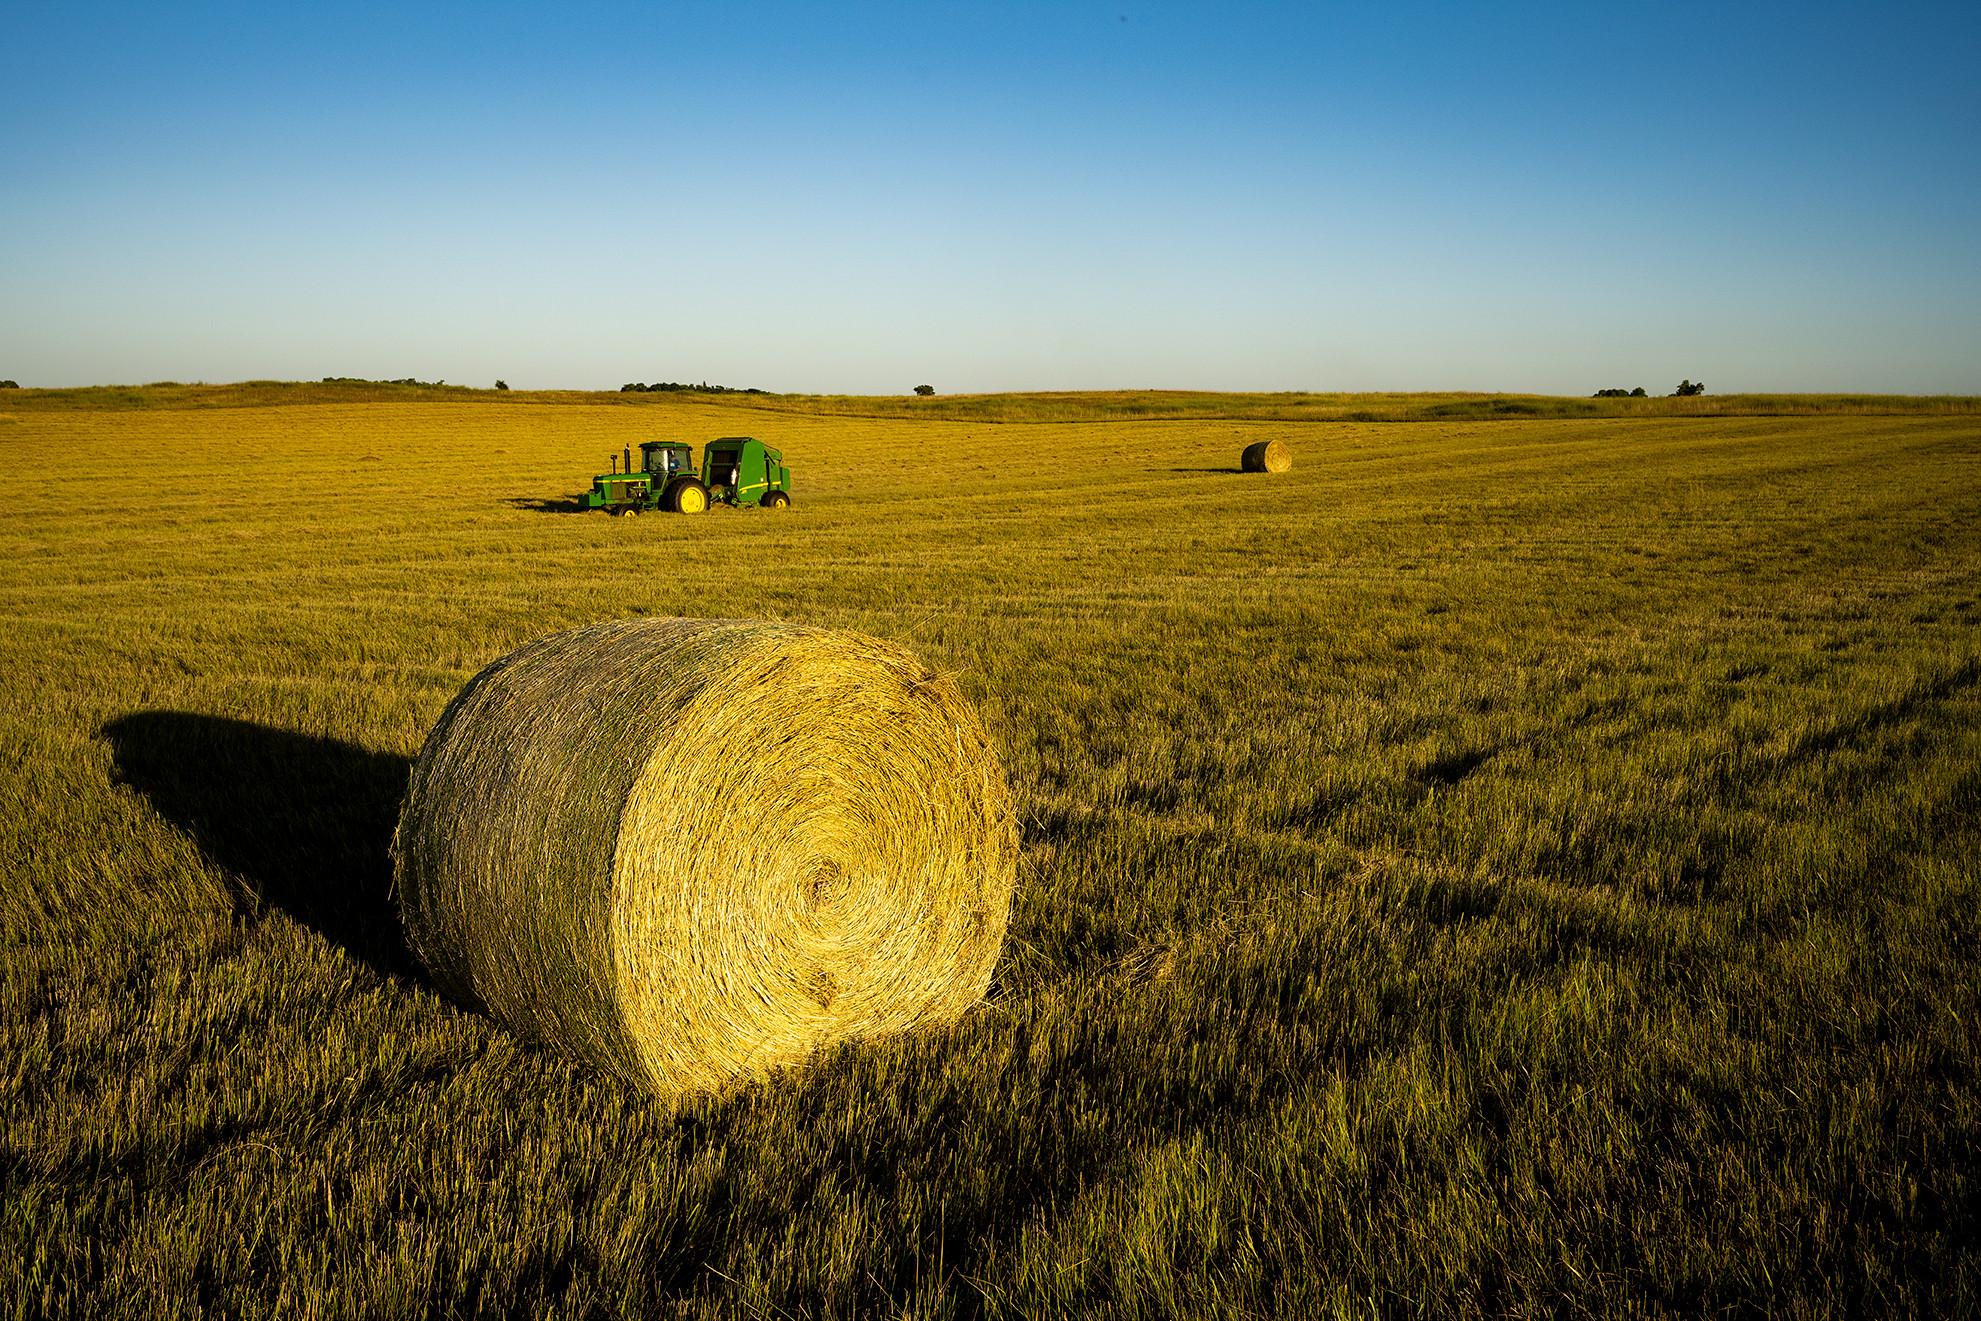 A bale of hay sits in the foreground. A baler can be seen in the distance.